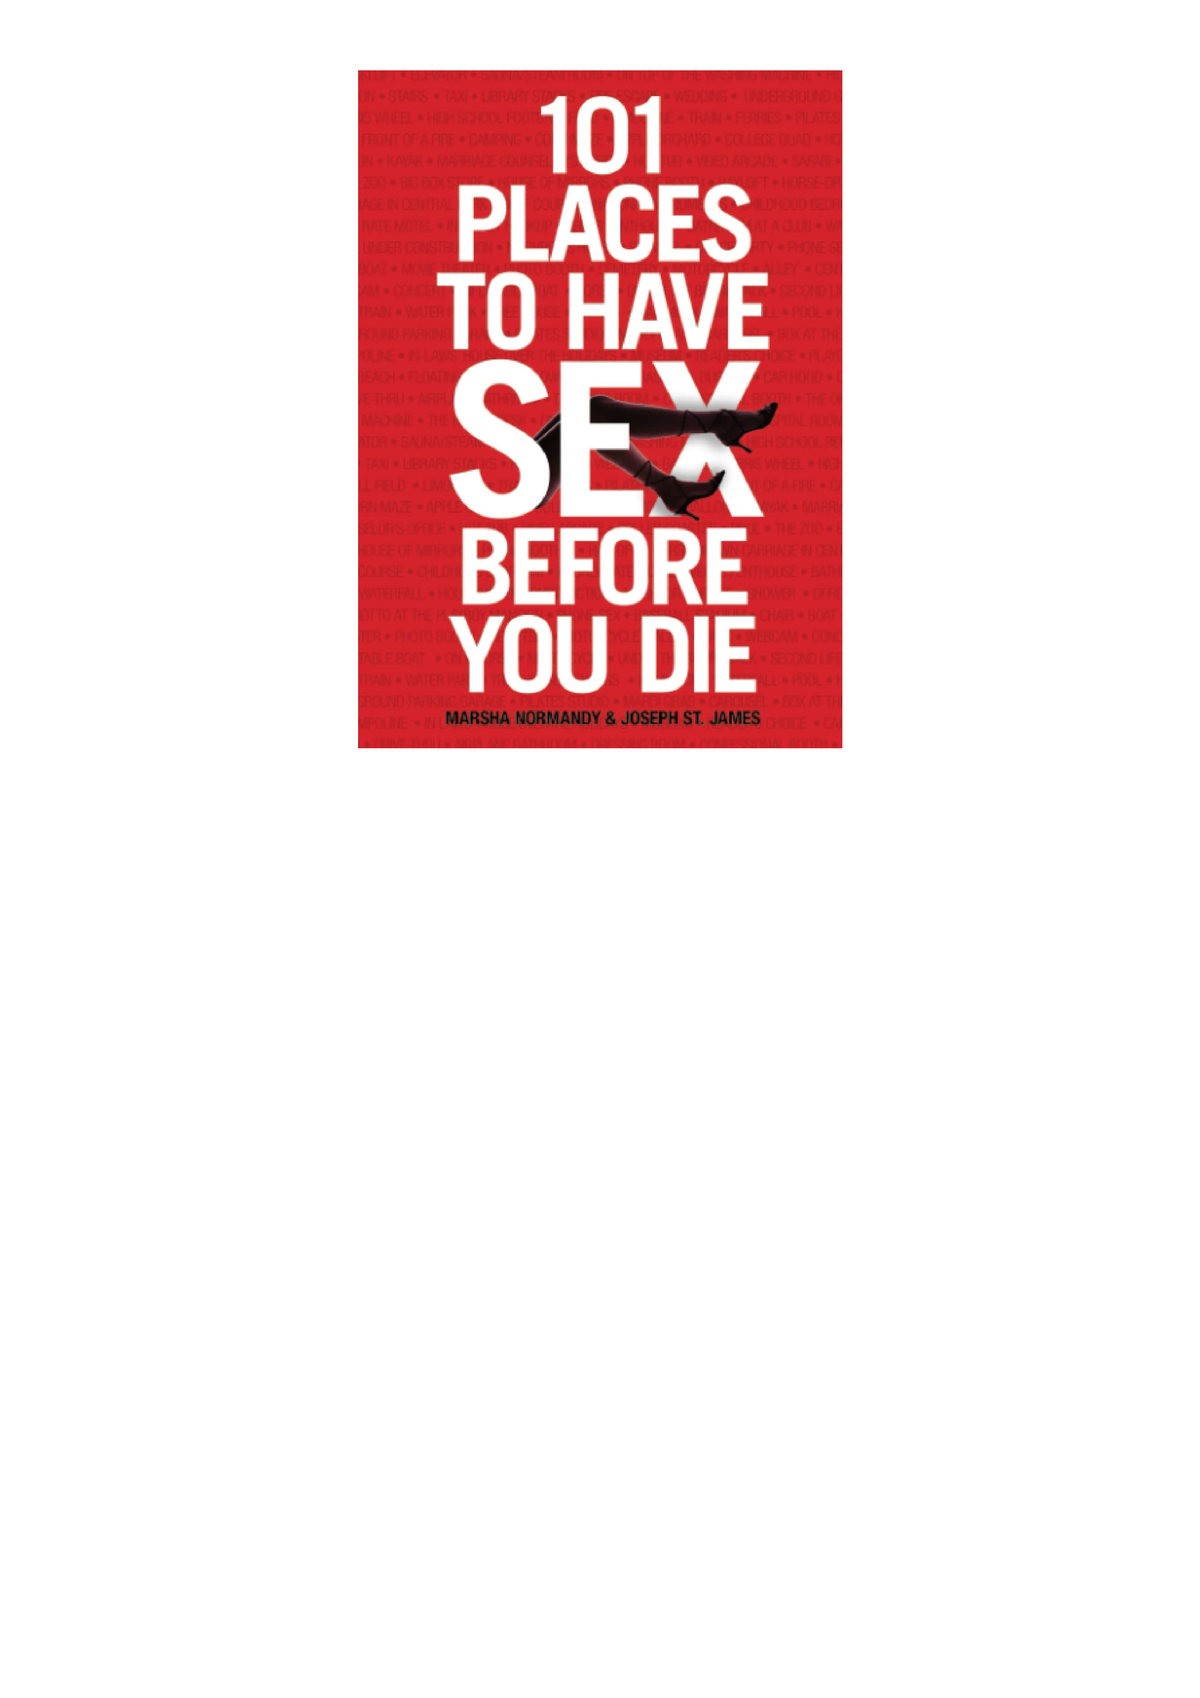 Read 101 Places To Have Sex Before You Die Download Medicine 4414